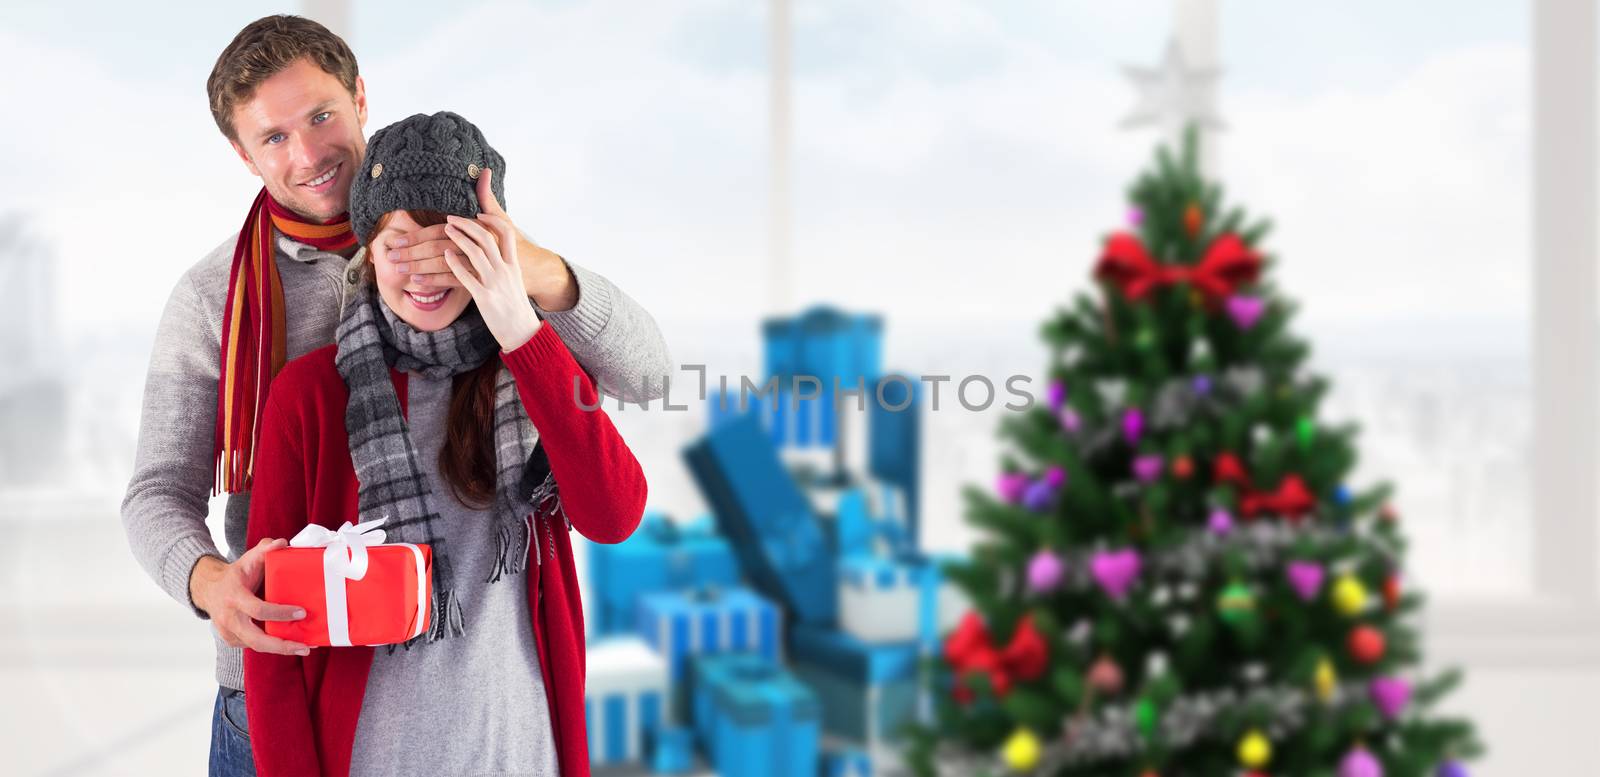 Composite image of man giving woman a present by Wavebreakmedia